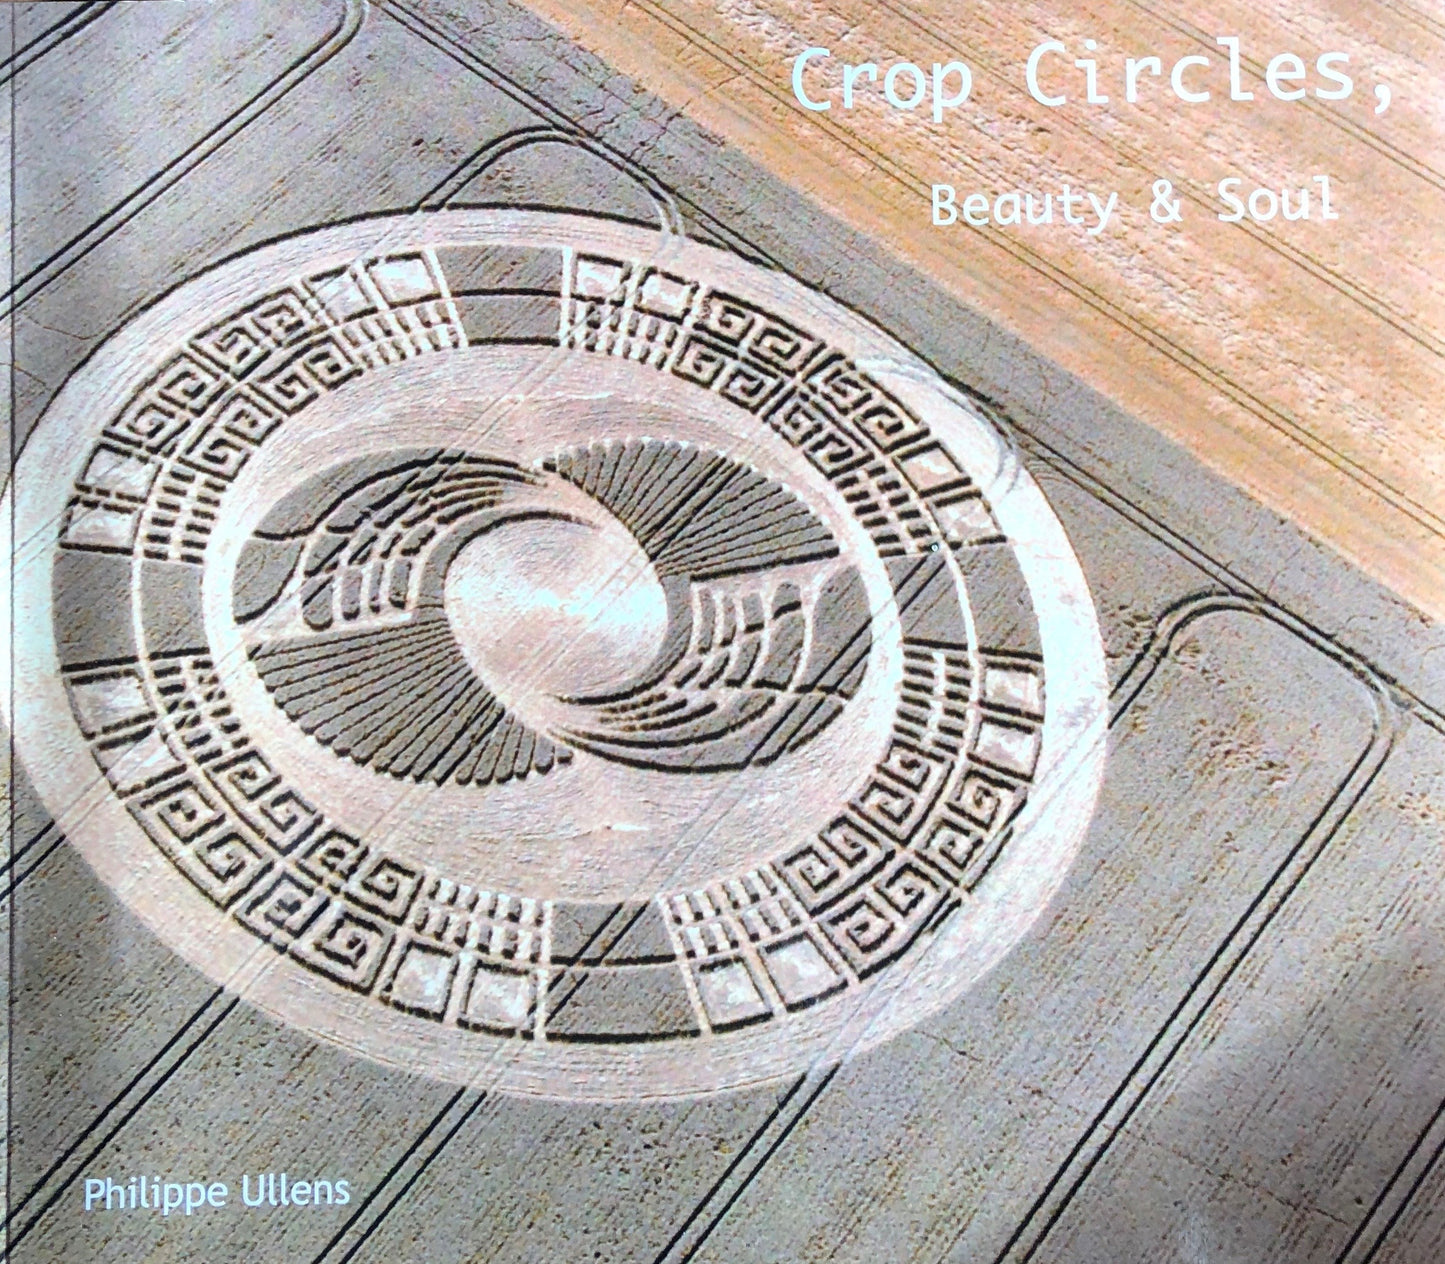 Crop Circles, Beauty & Soul by Phillippe Ullens